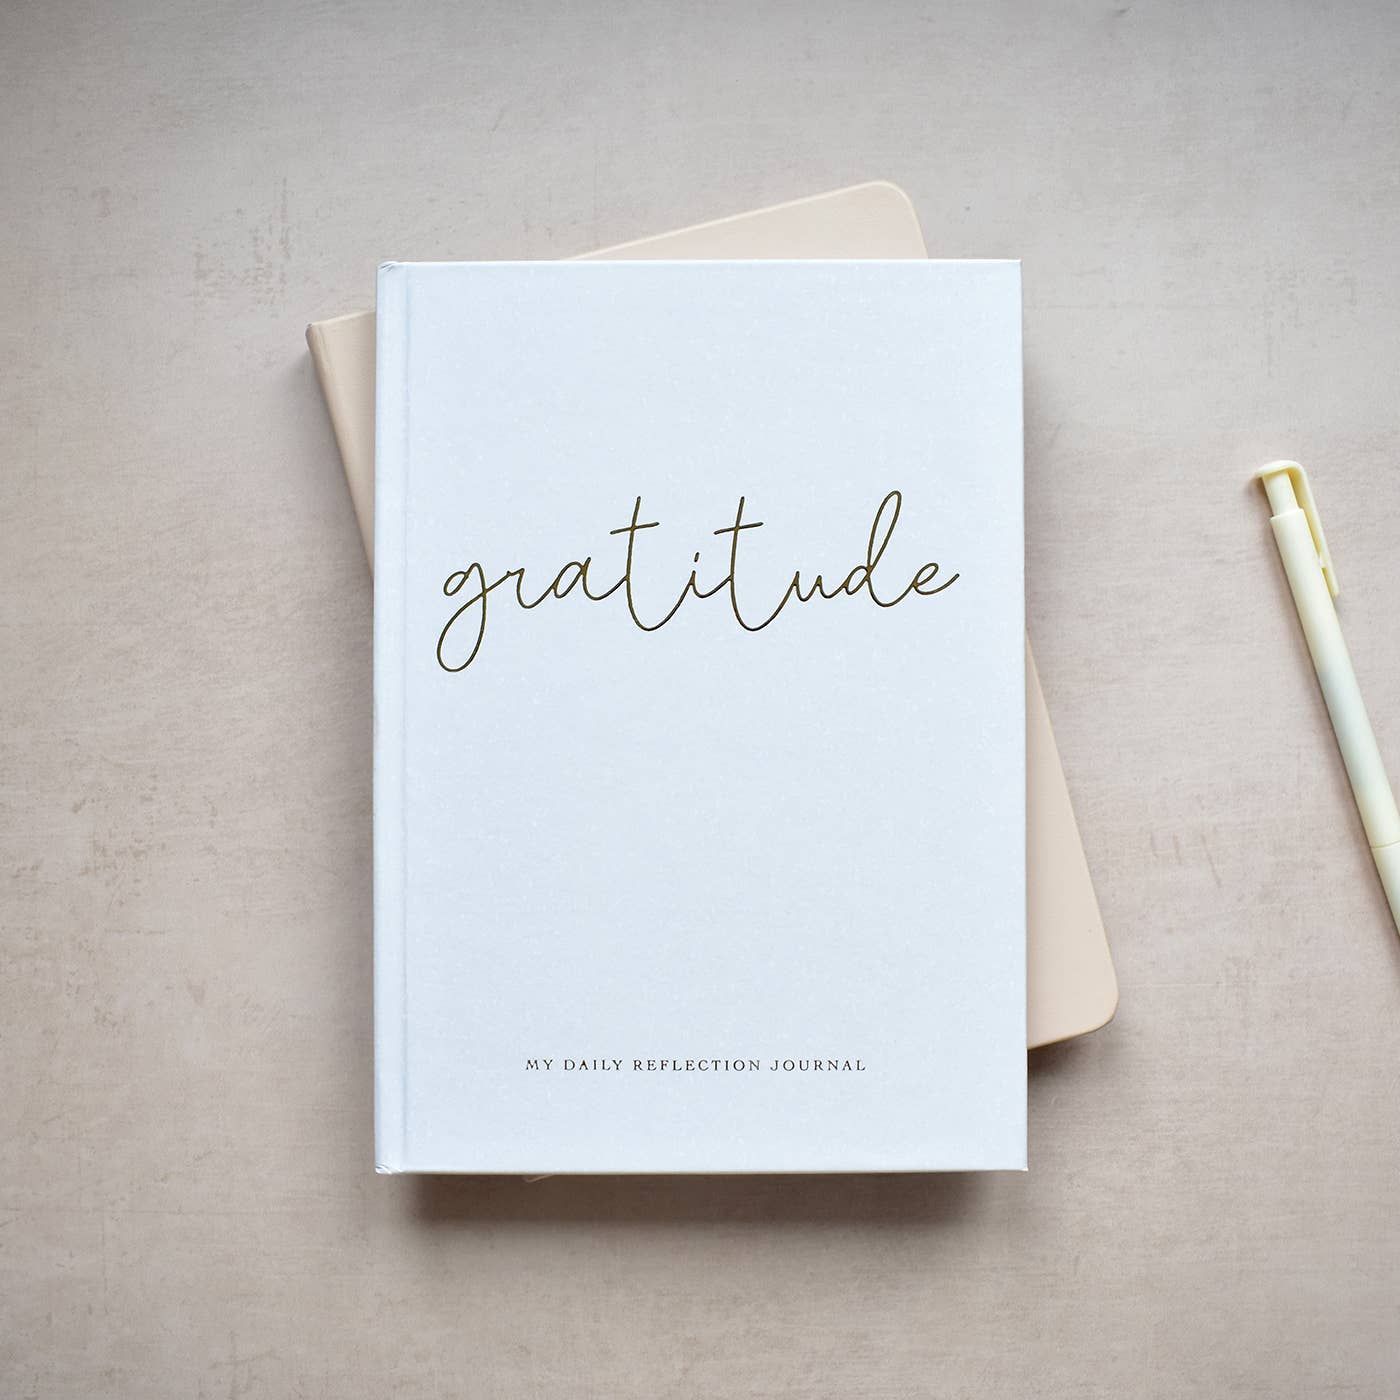 Gratitude Gold Foiled Journal - Daily reflection Journal